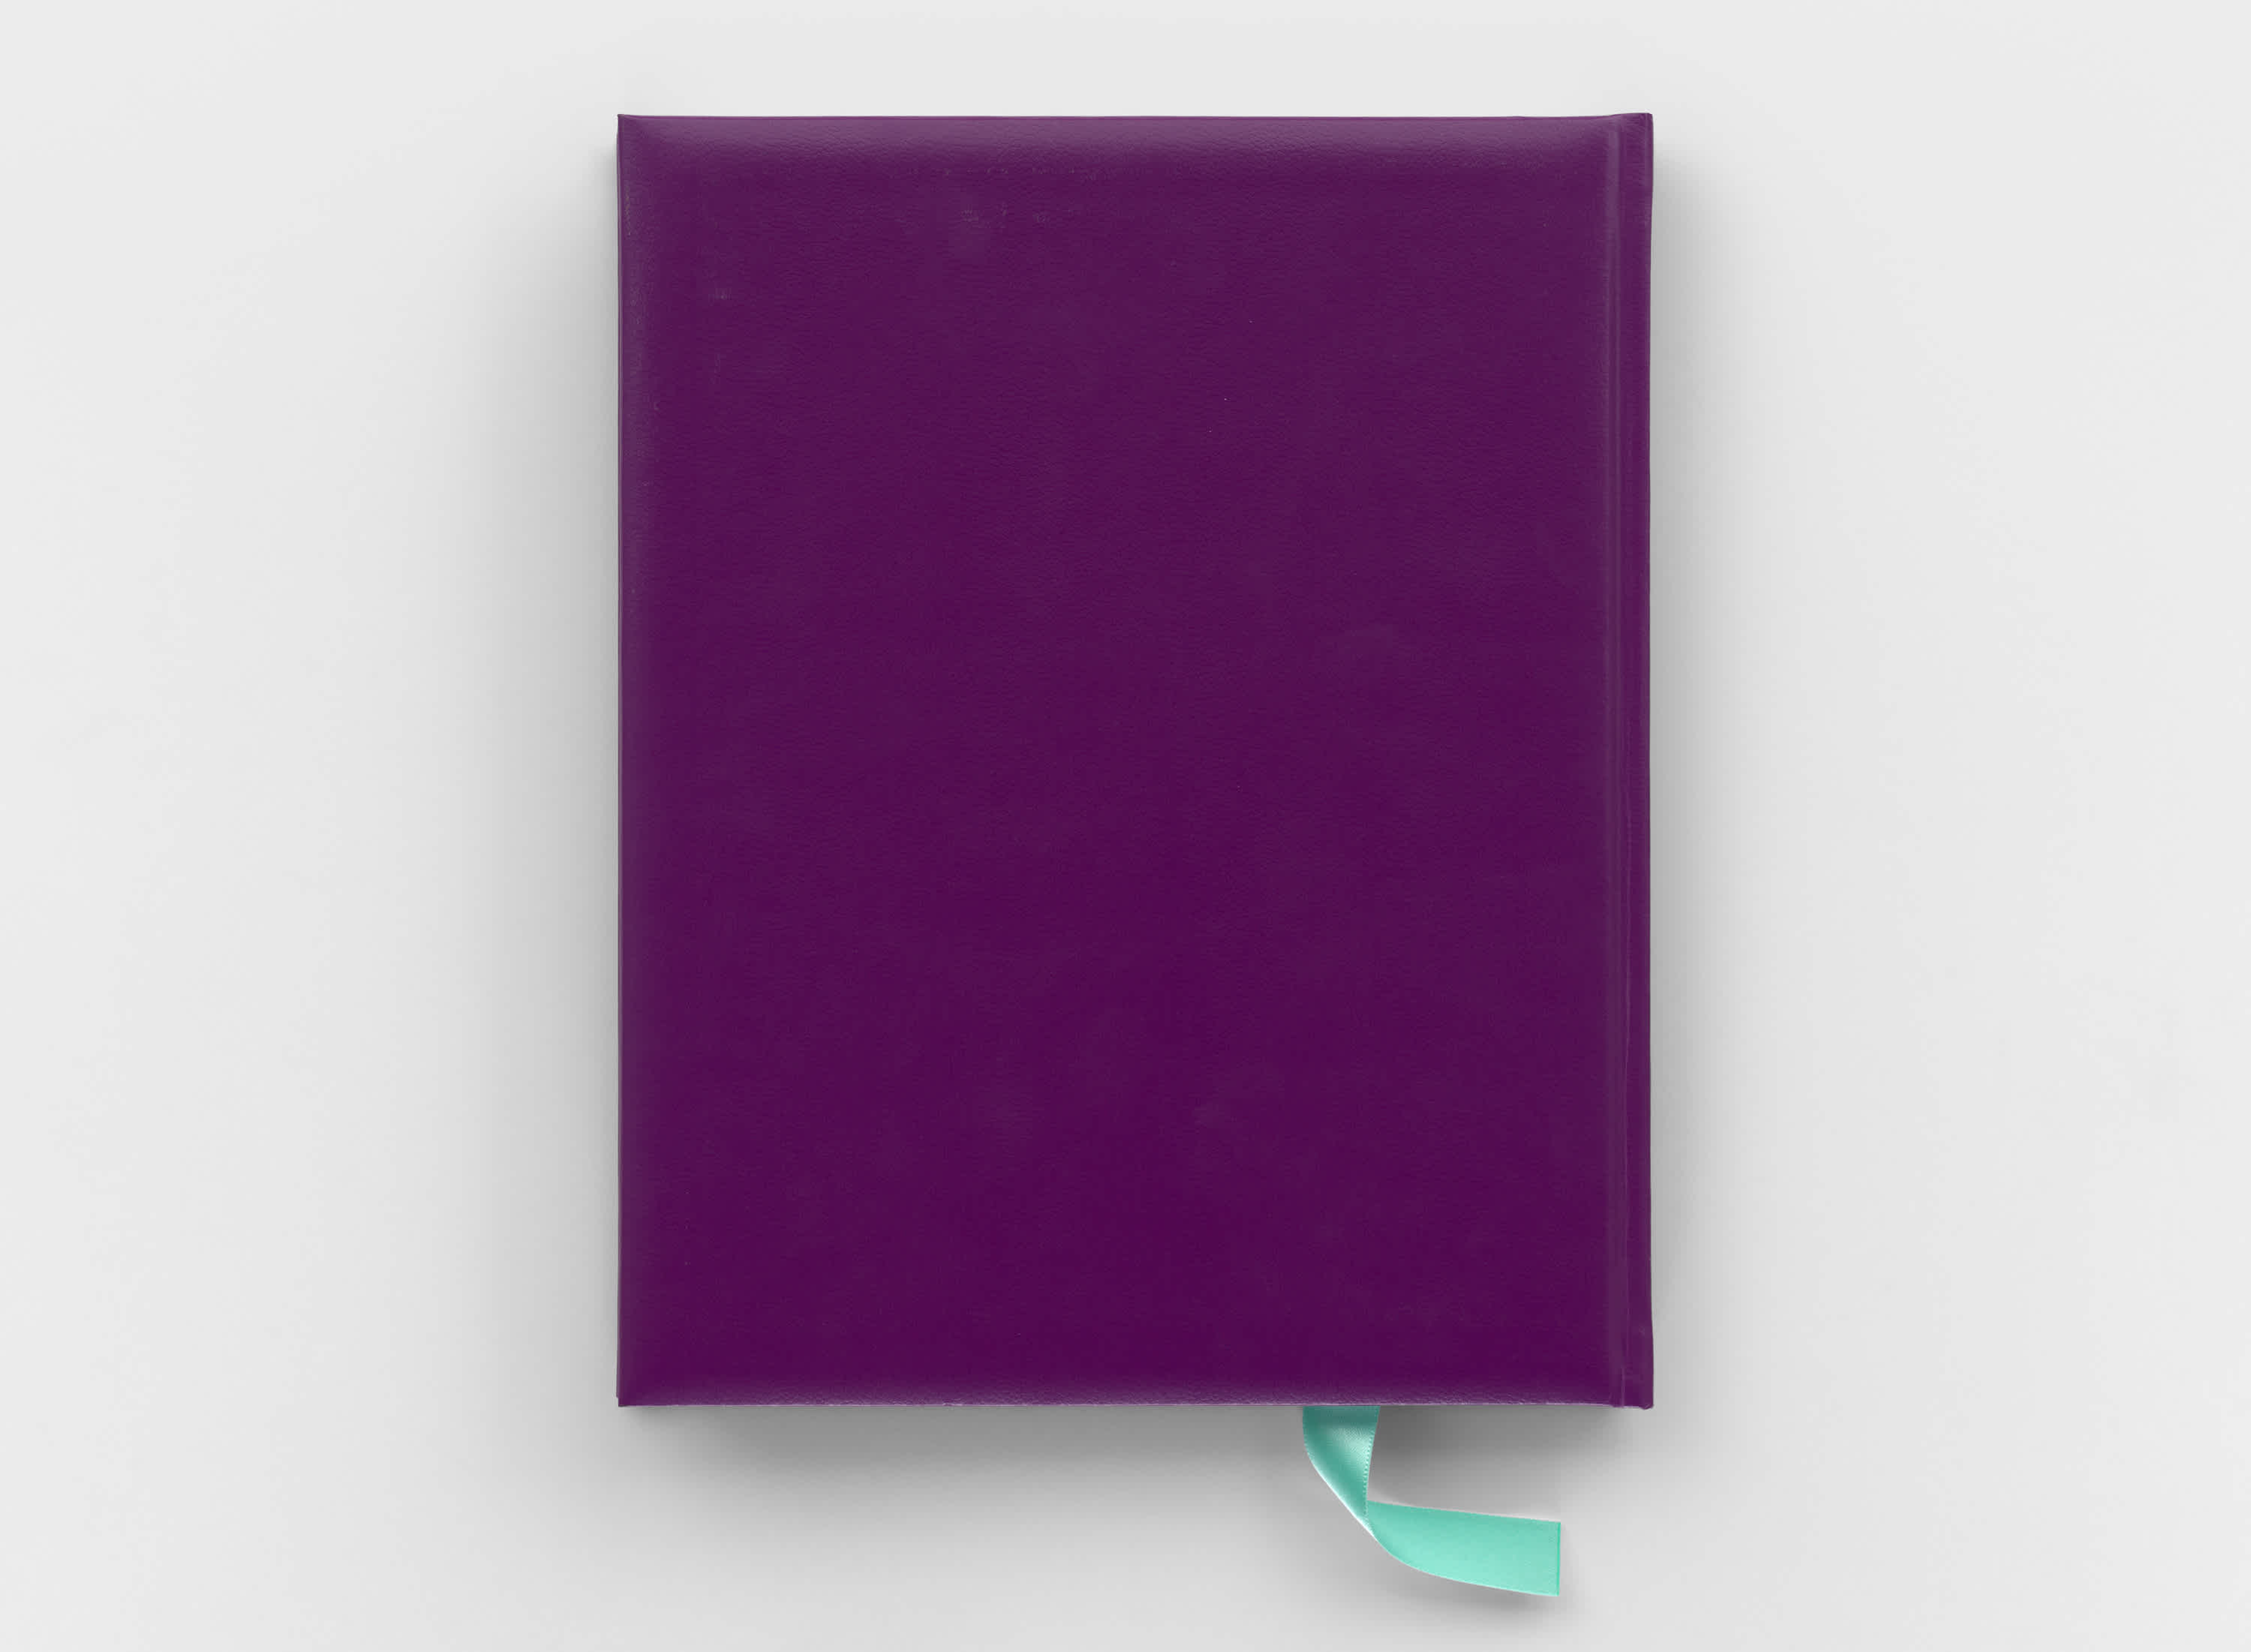 A purple book lays flat on a white background. Only the back cover and light blue ribbon bookmark is visible.